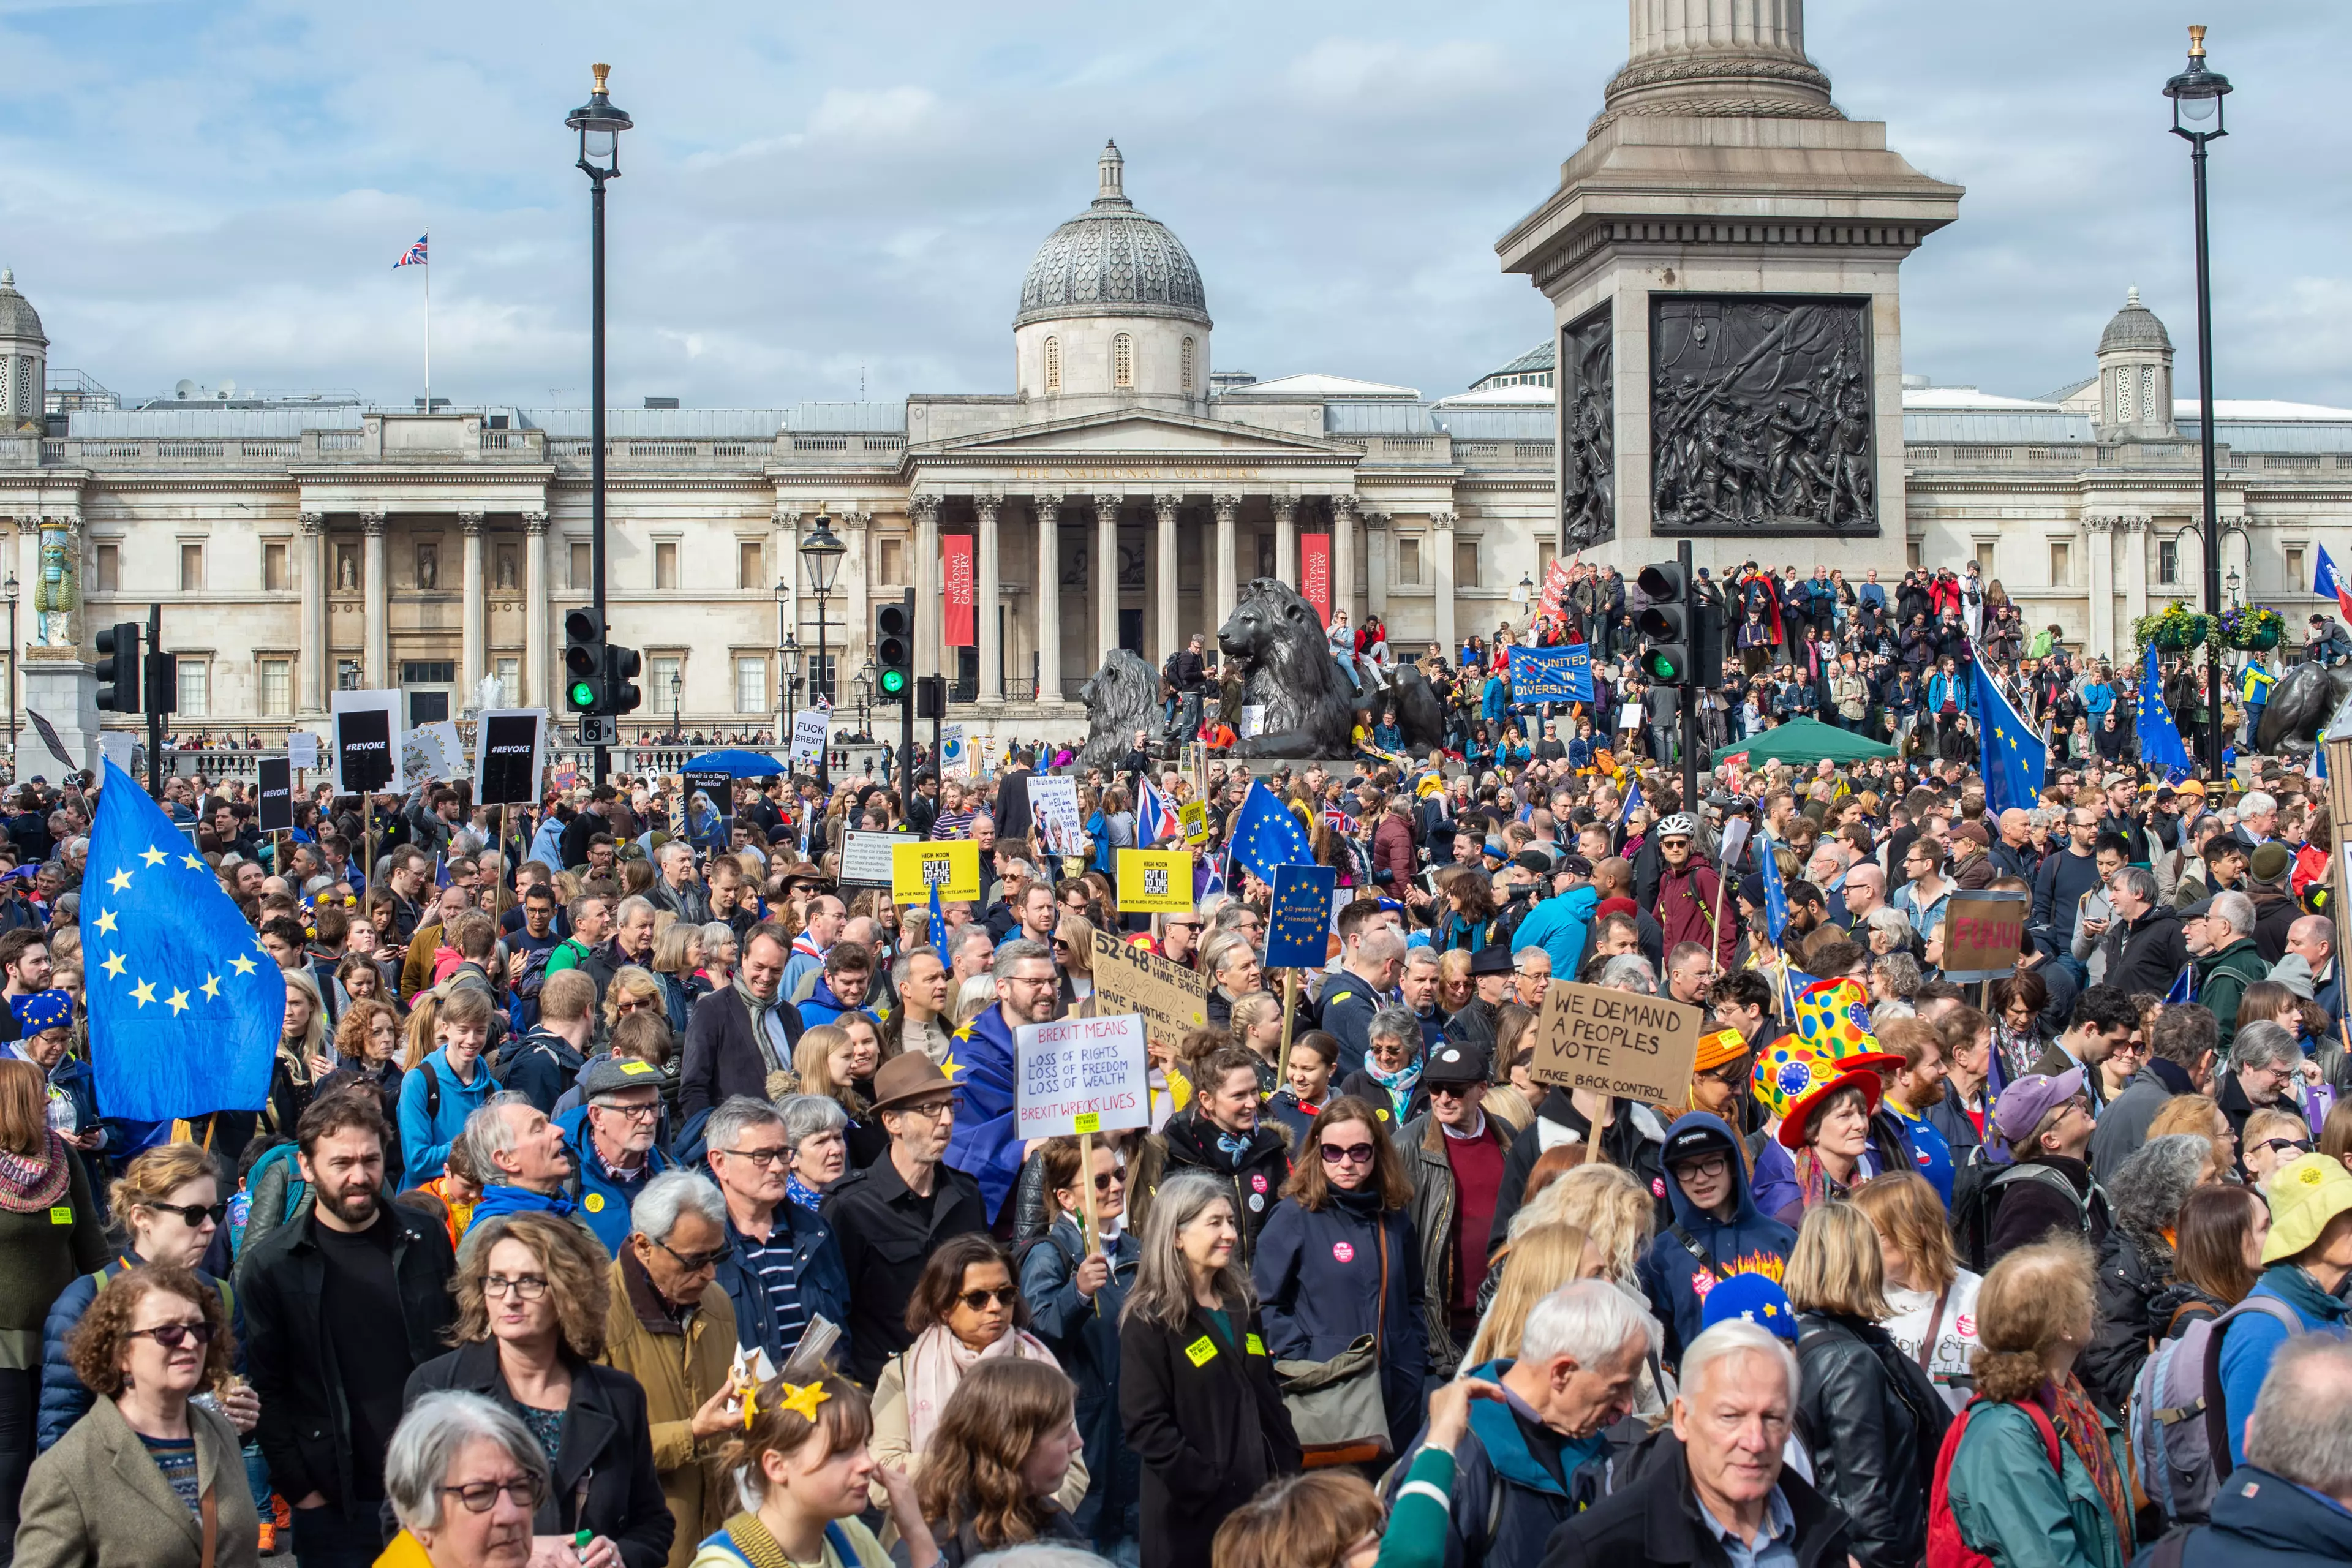 Around a million people marched in London to demand a 'People's Vote' on Brexit.